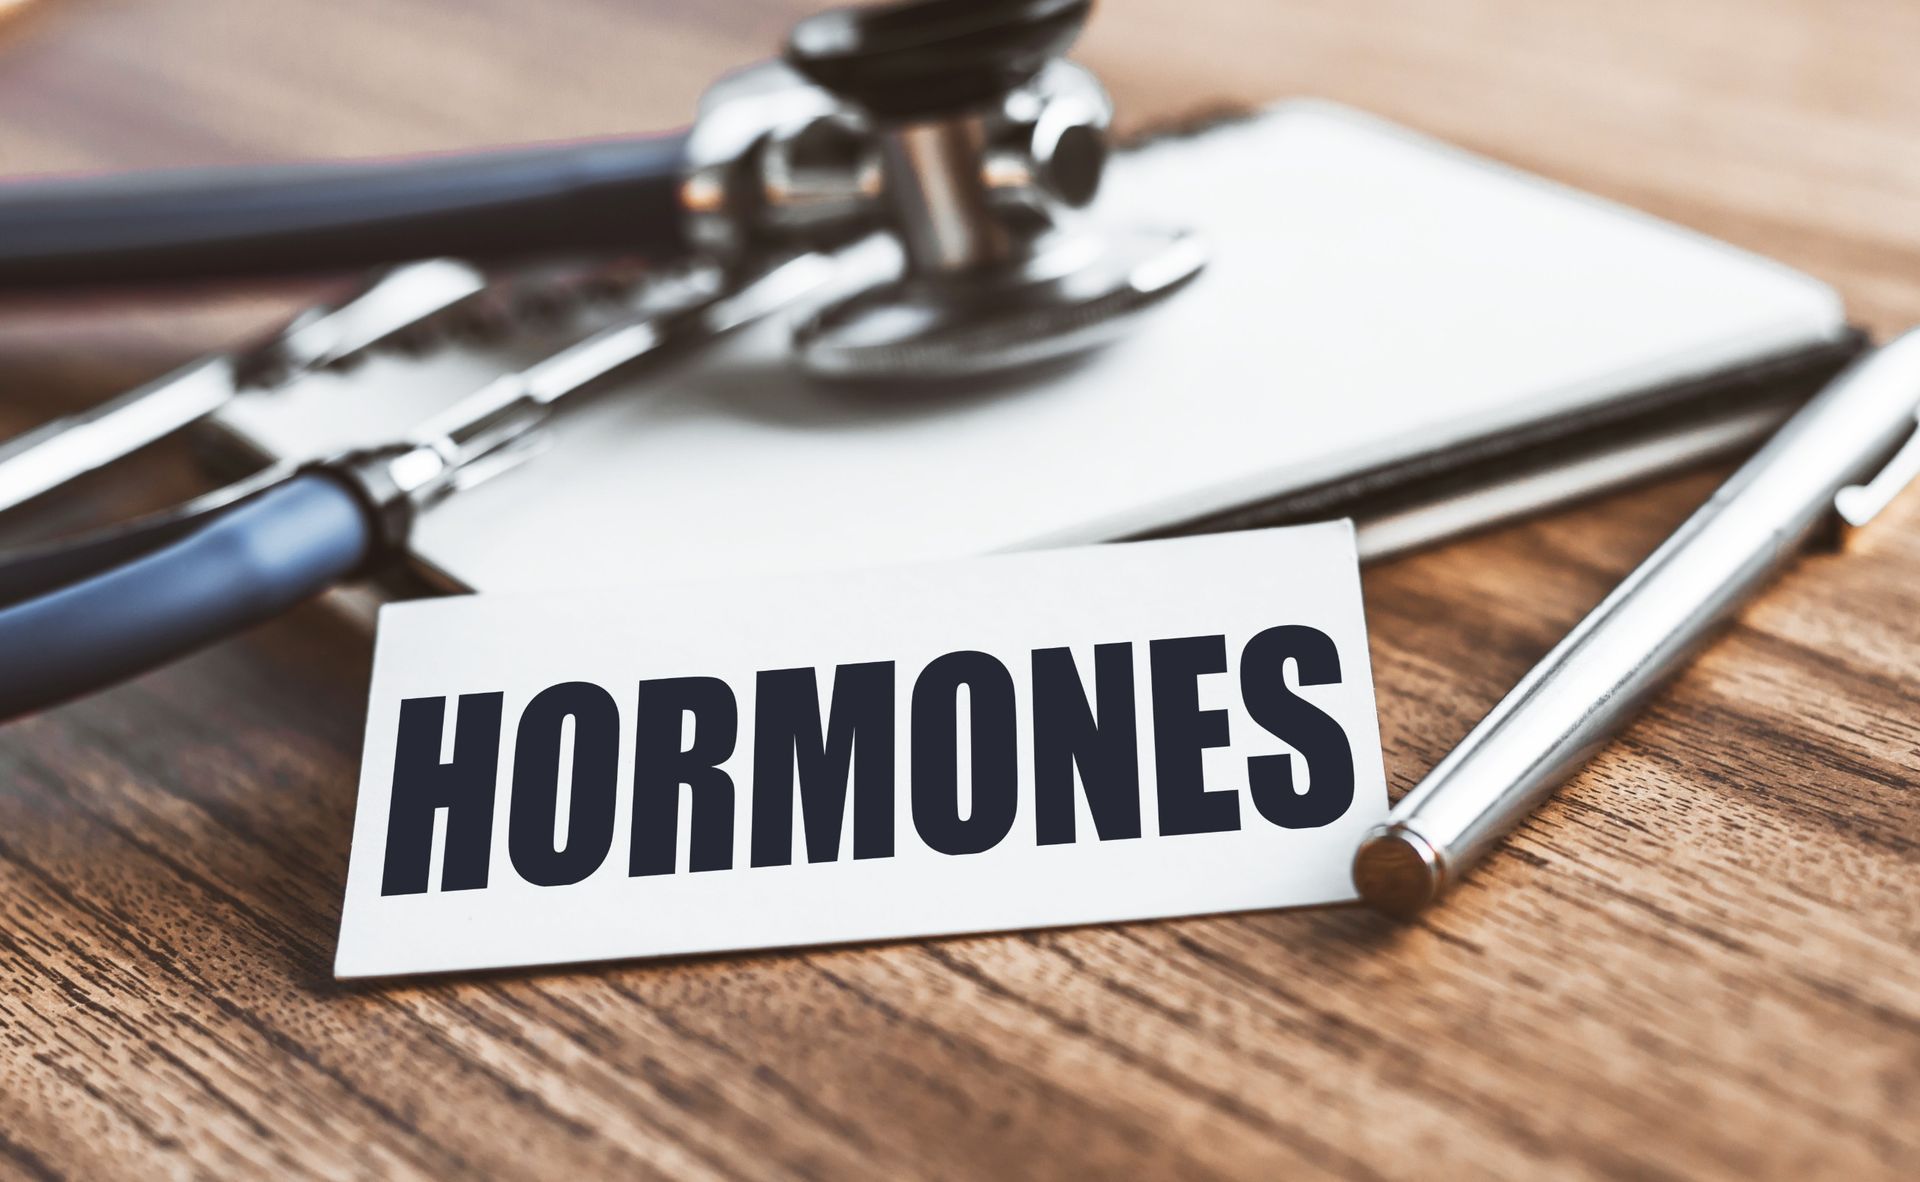 How to Deal with Hormonal Imbalances That Affect Your Marriage